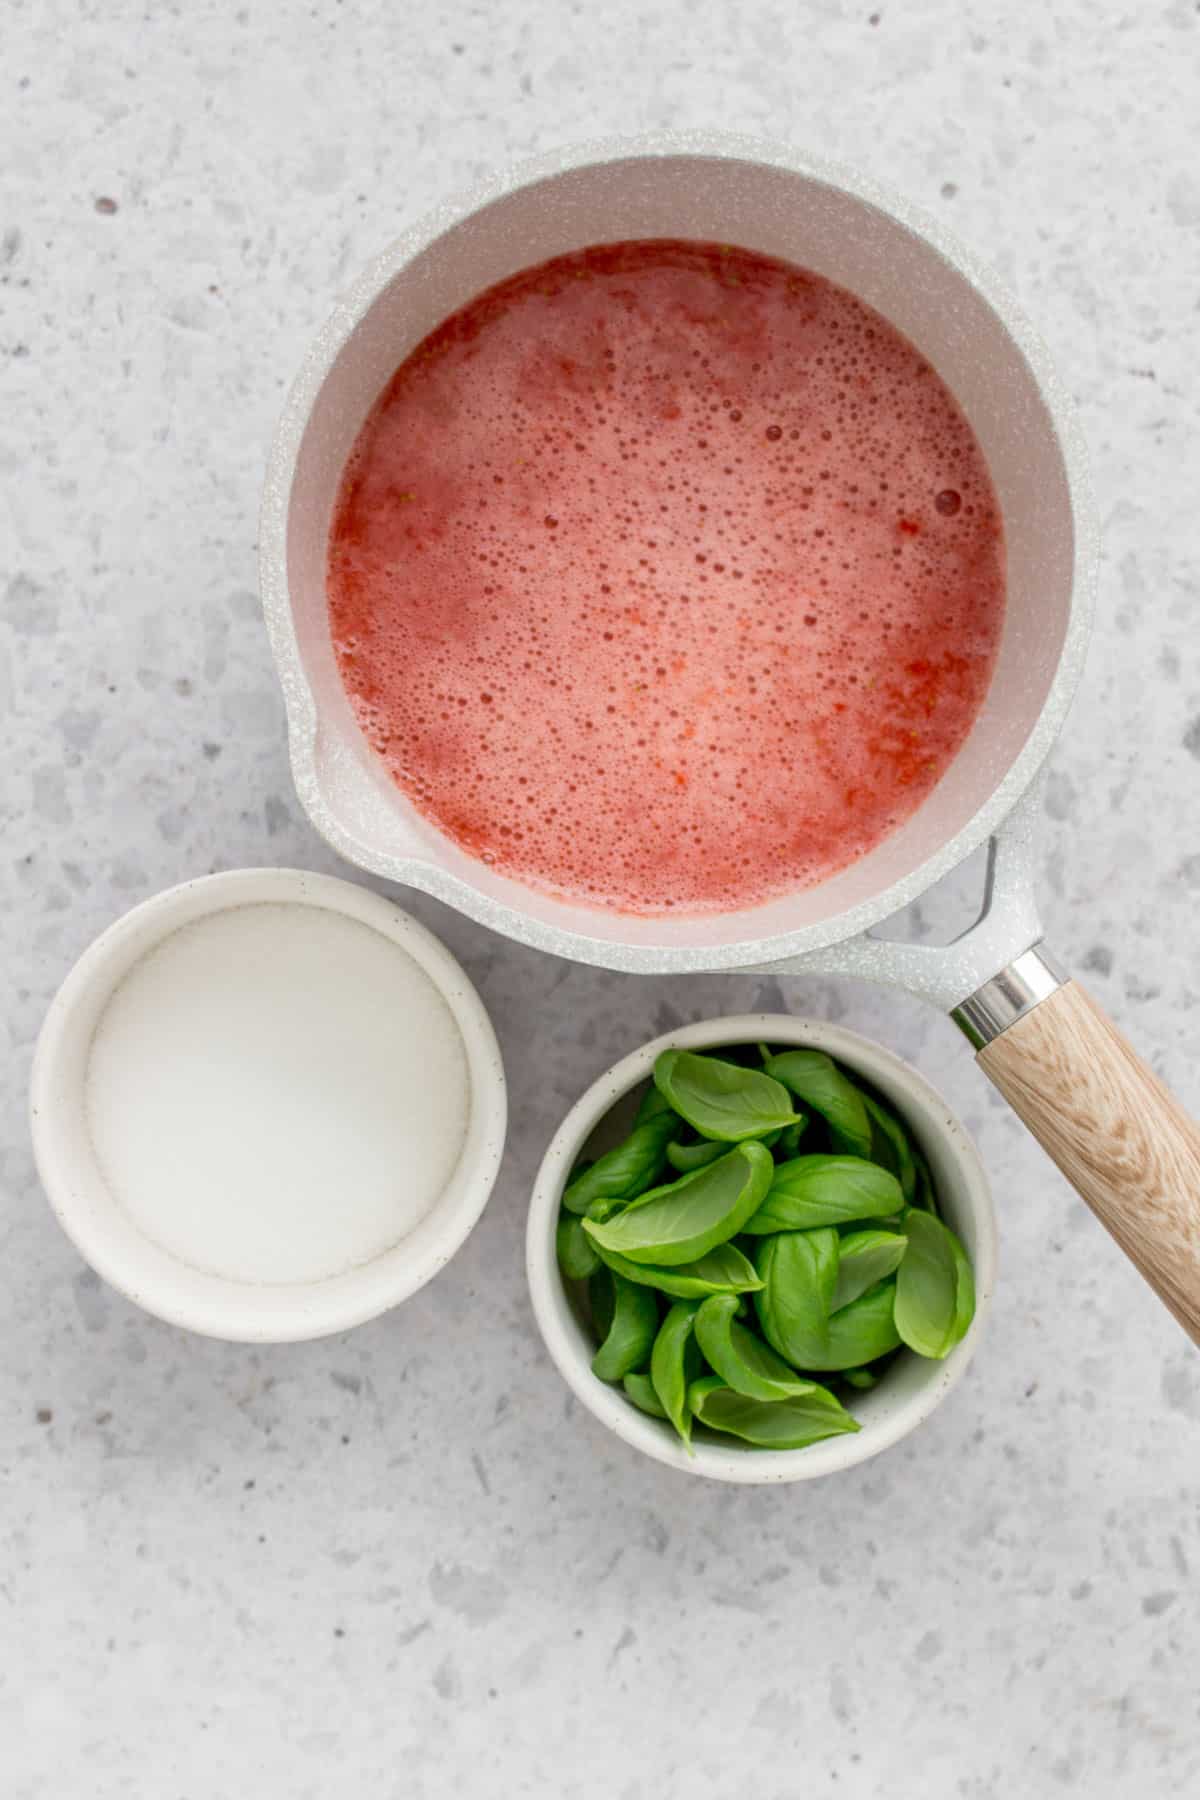 Pureed strawberry with sugar and basil beside it.